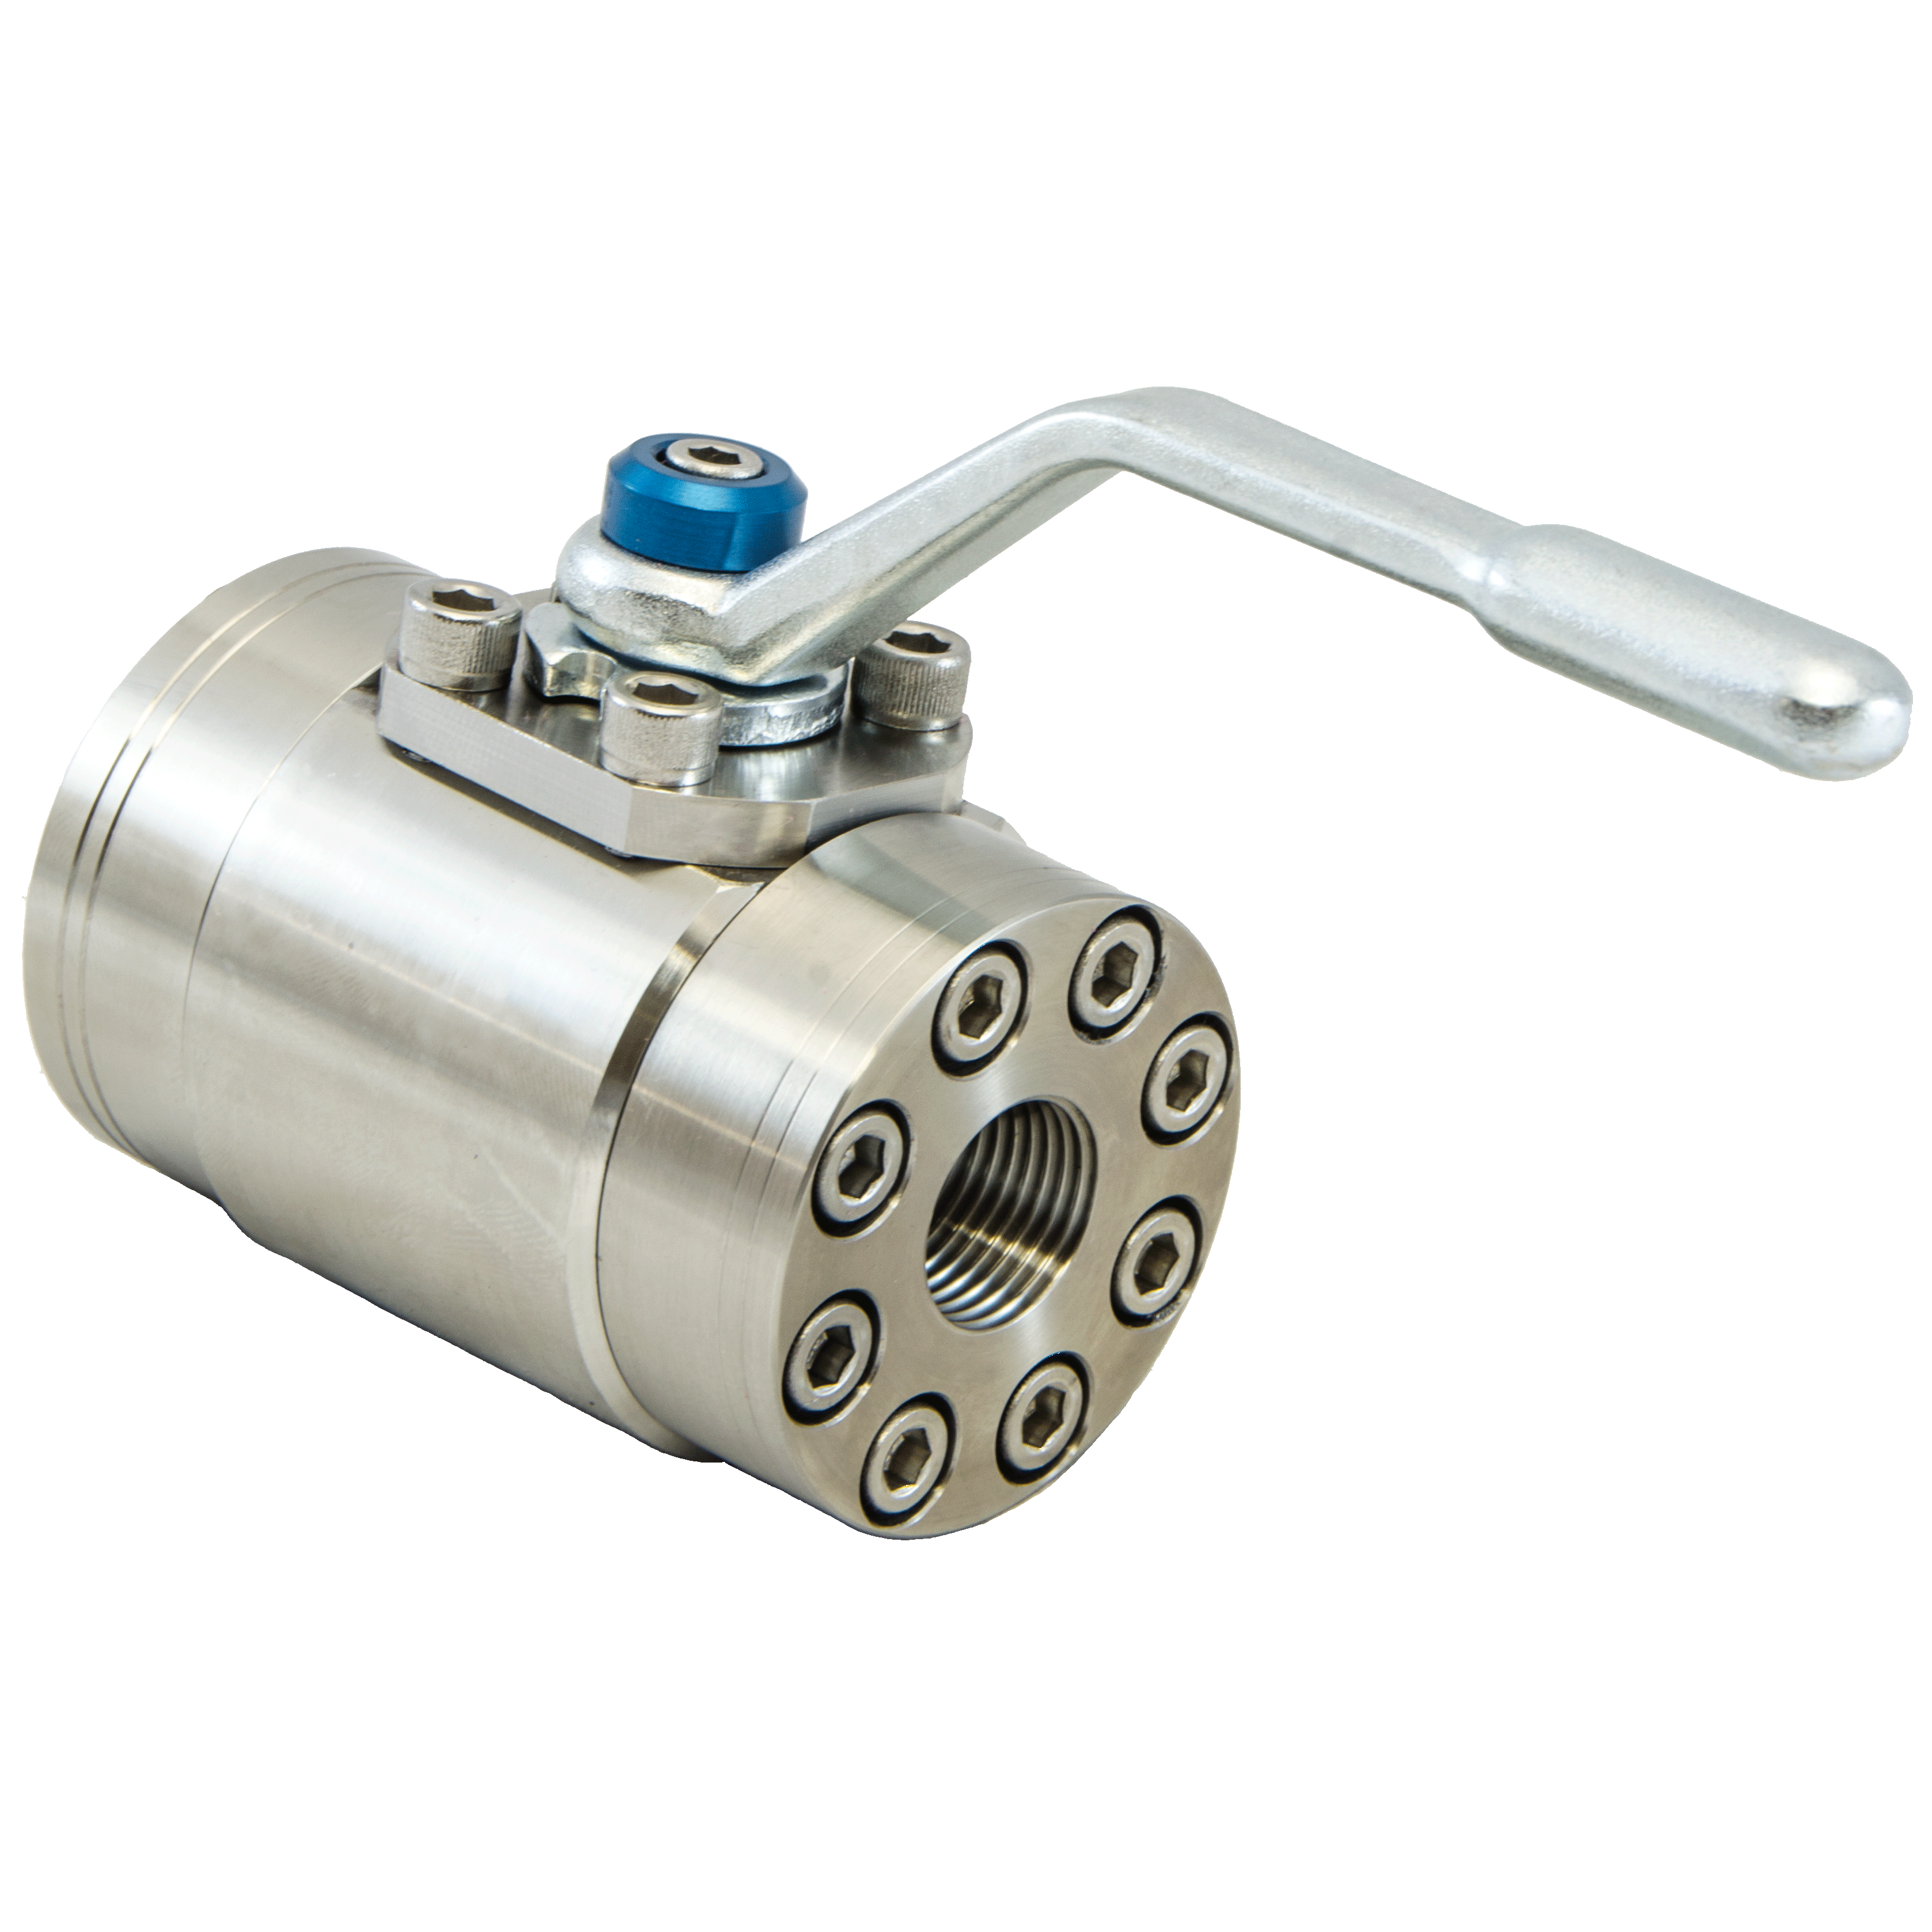 BVQG-1500N-2211 : DMIC Stainless Gas Ball Valve, 1.5 NPT, 316 Stainless Steel, 6000psi, Two-Way